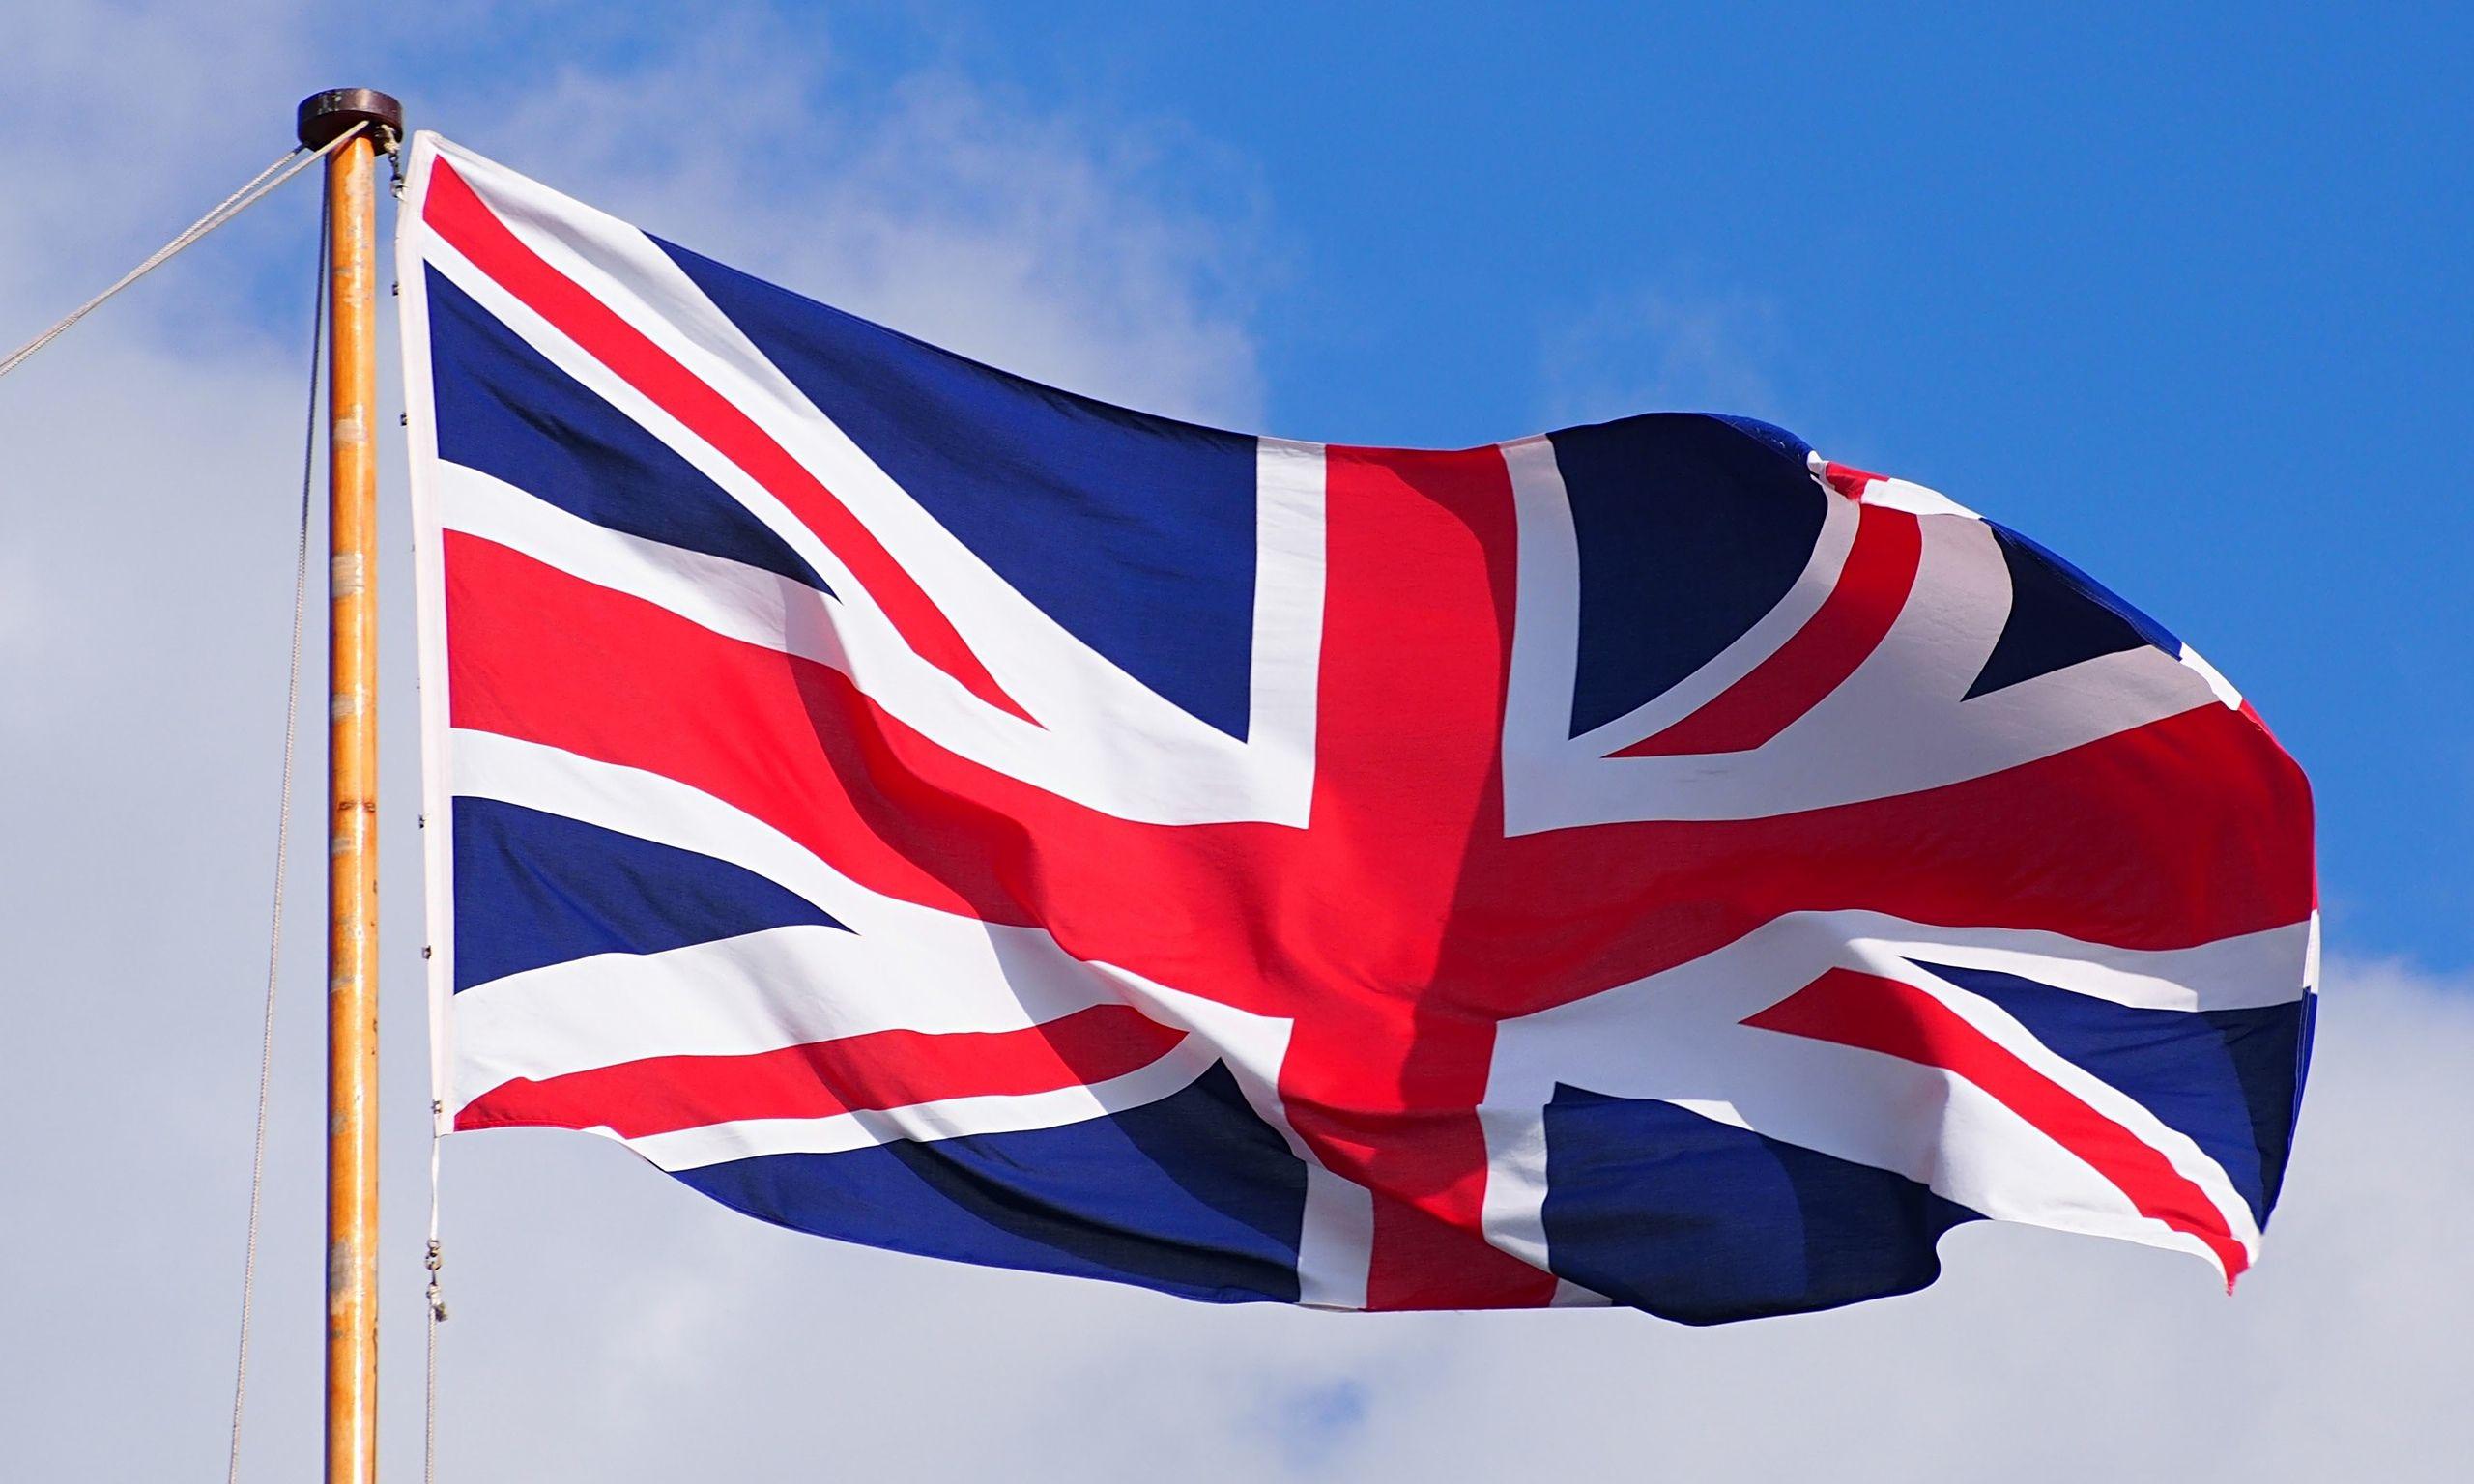 British Union Jack Flag Wallpapers - Wallpaper Cave